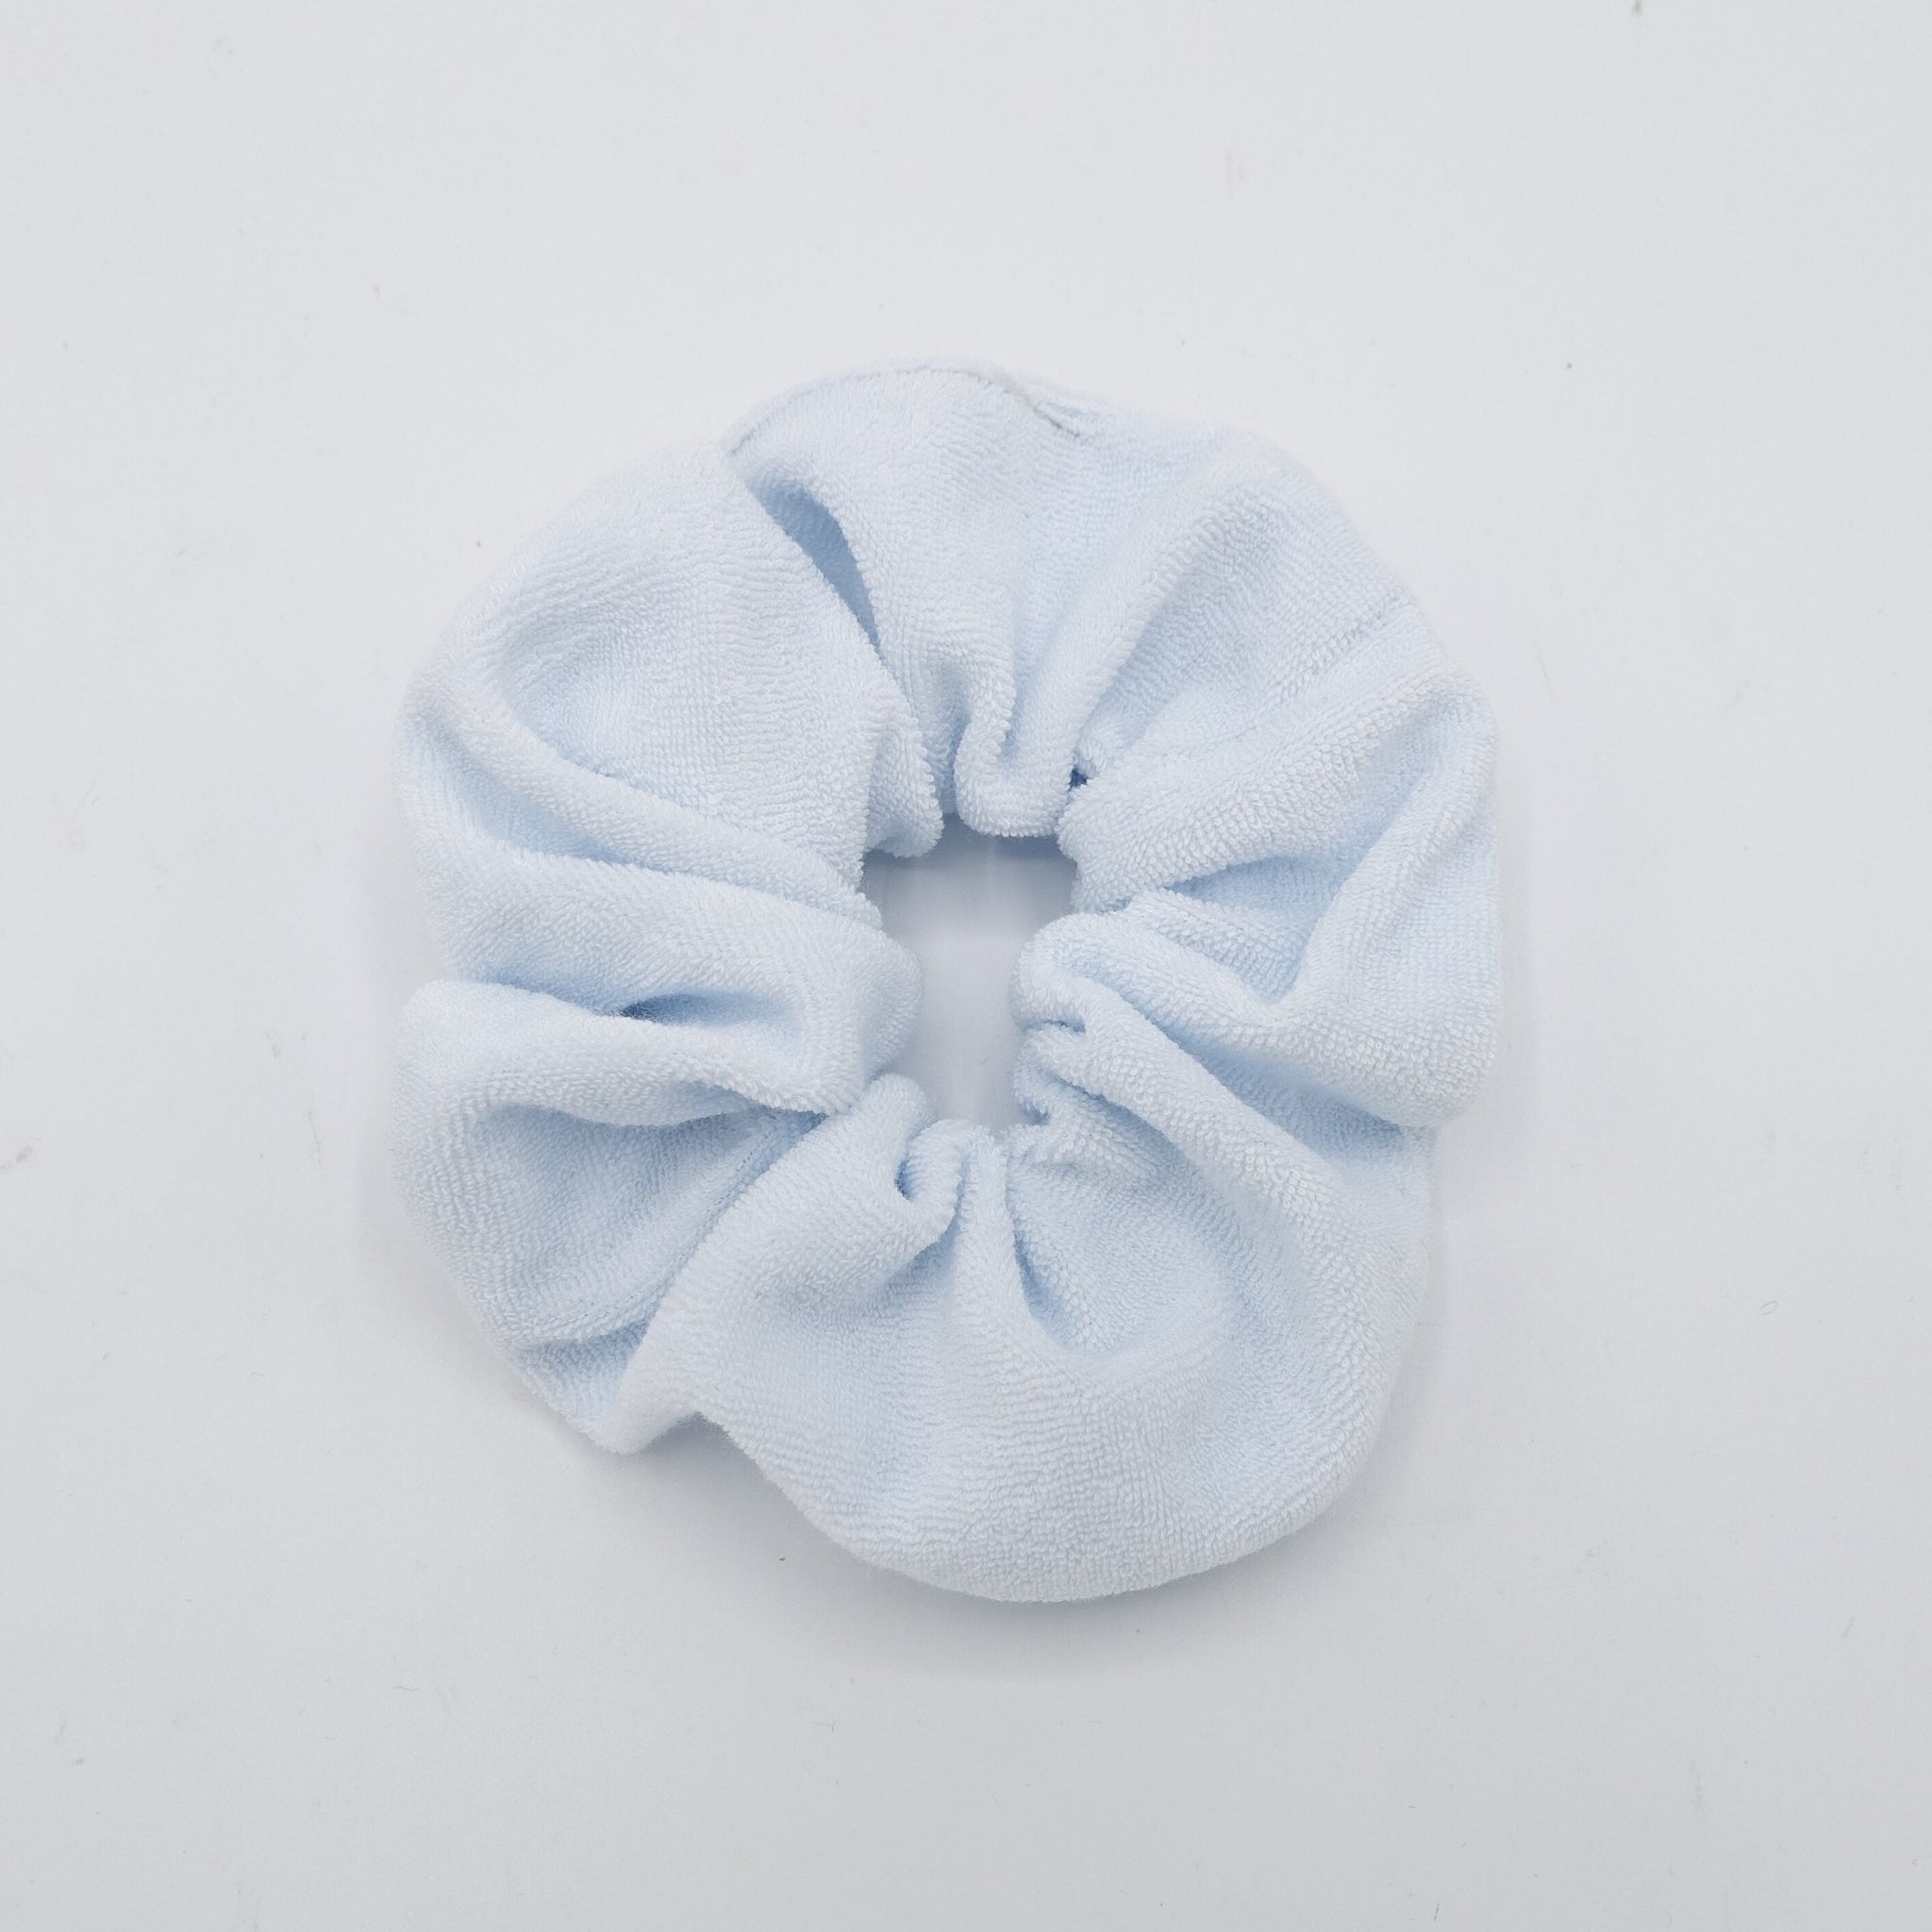 veryshine.com Scrunchies Baby blue terry cloth scrunchies solid cotton scrunchies hair elastic accessory for women